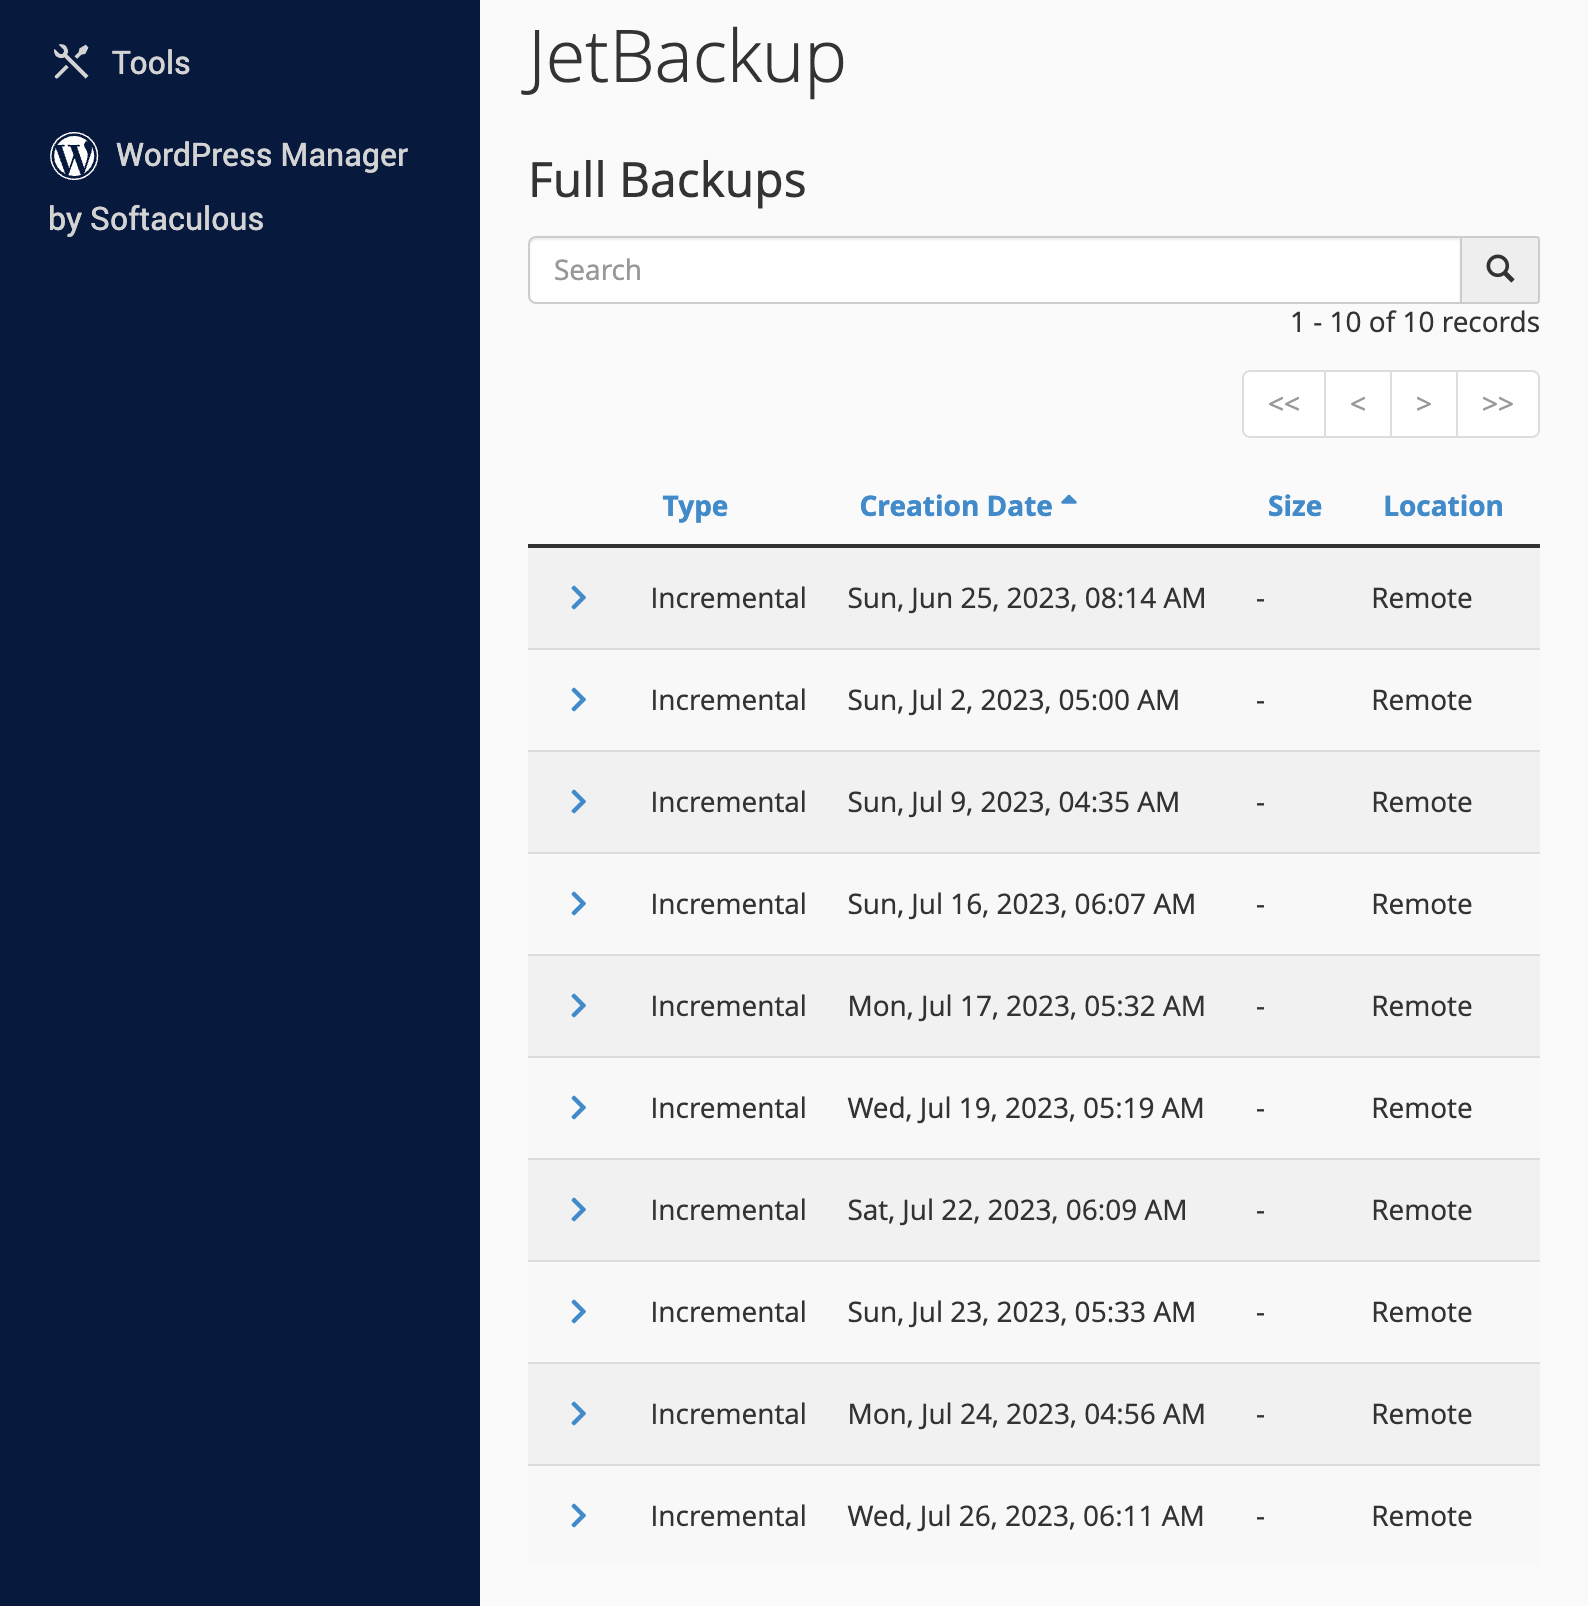 fitur jetbackup cpanel idcloudhost